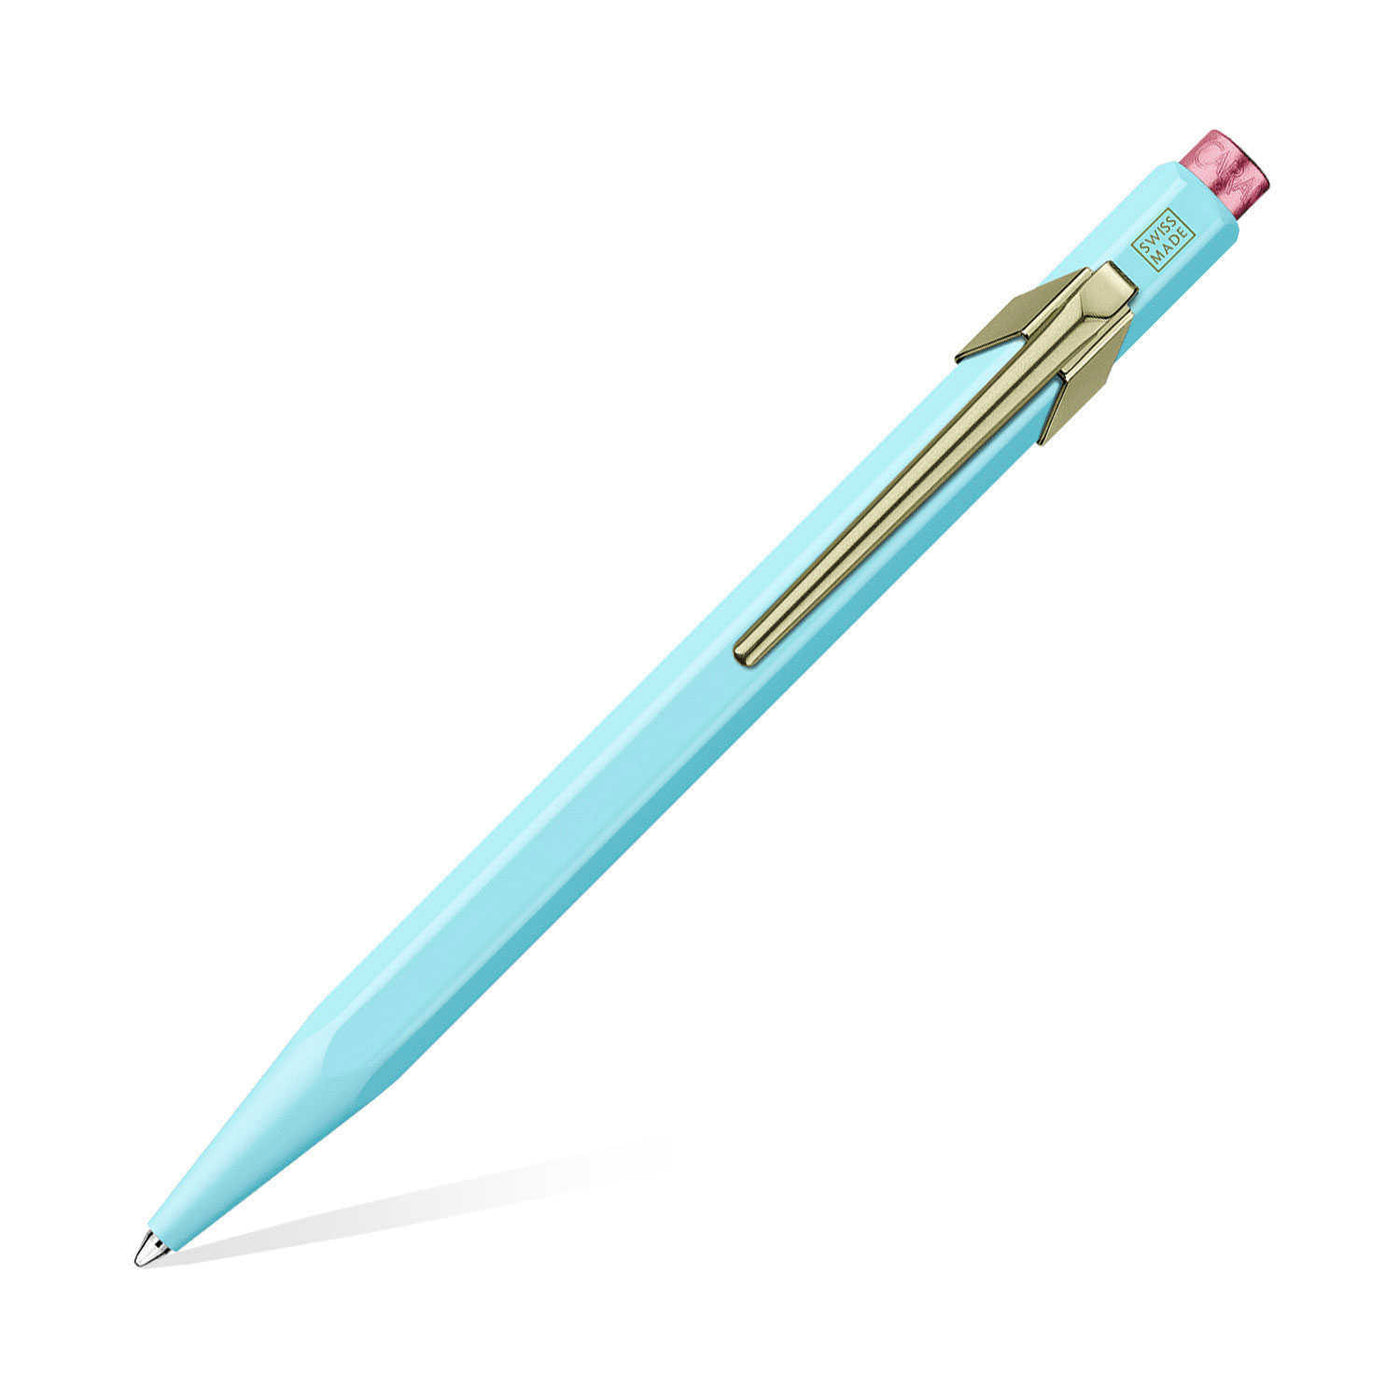 Caran d'Ache 849 Claim Your Style Ball Pen - Bluish Pale (Limited Edition) 1